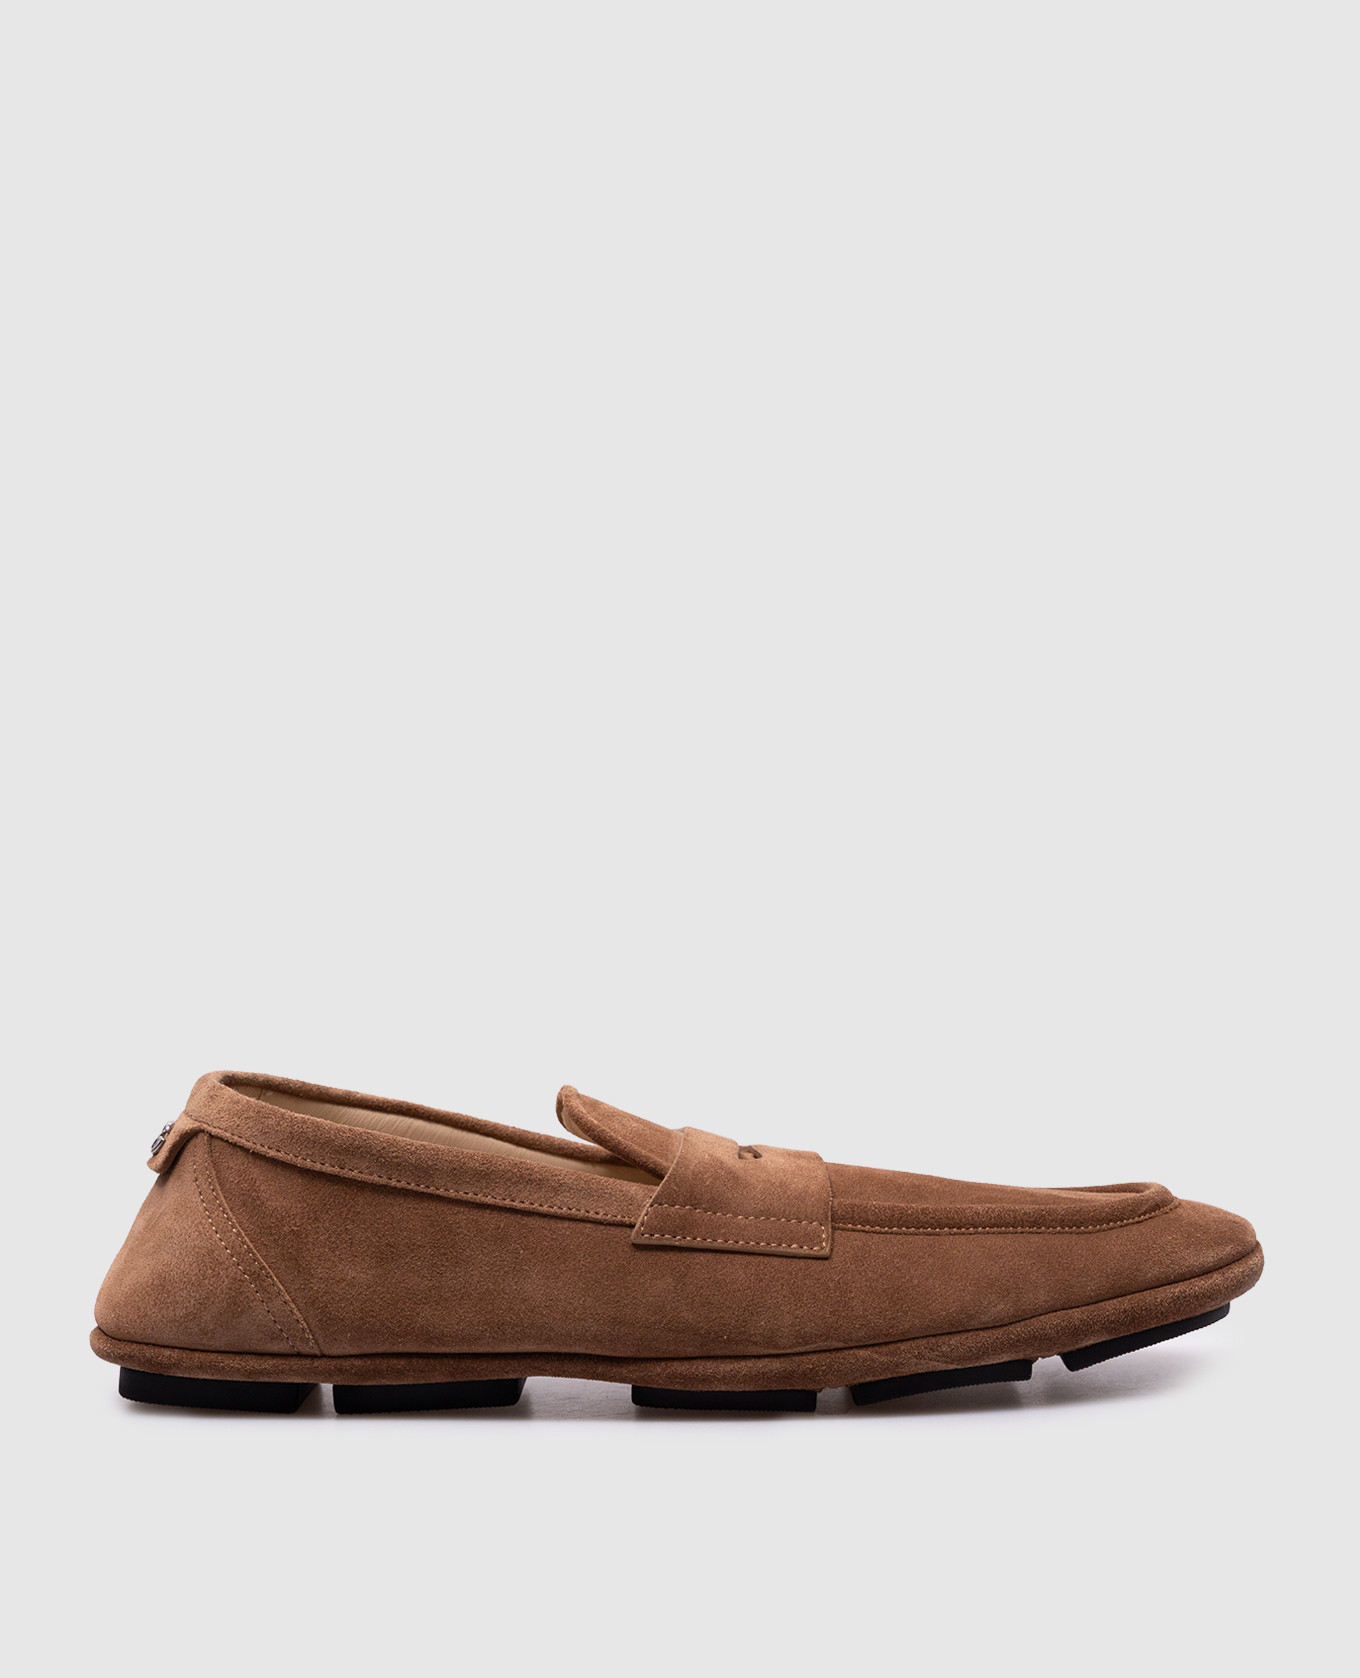 Brown suede moccasins with metallic DG logo